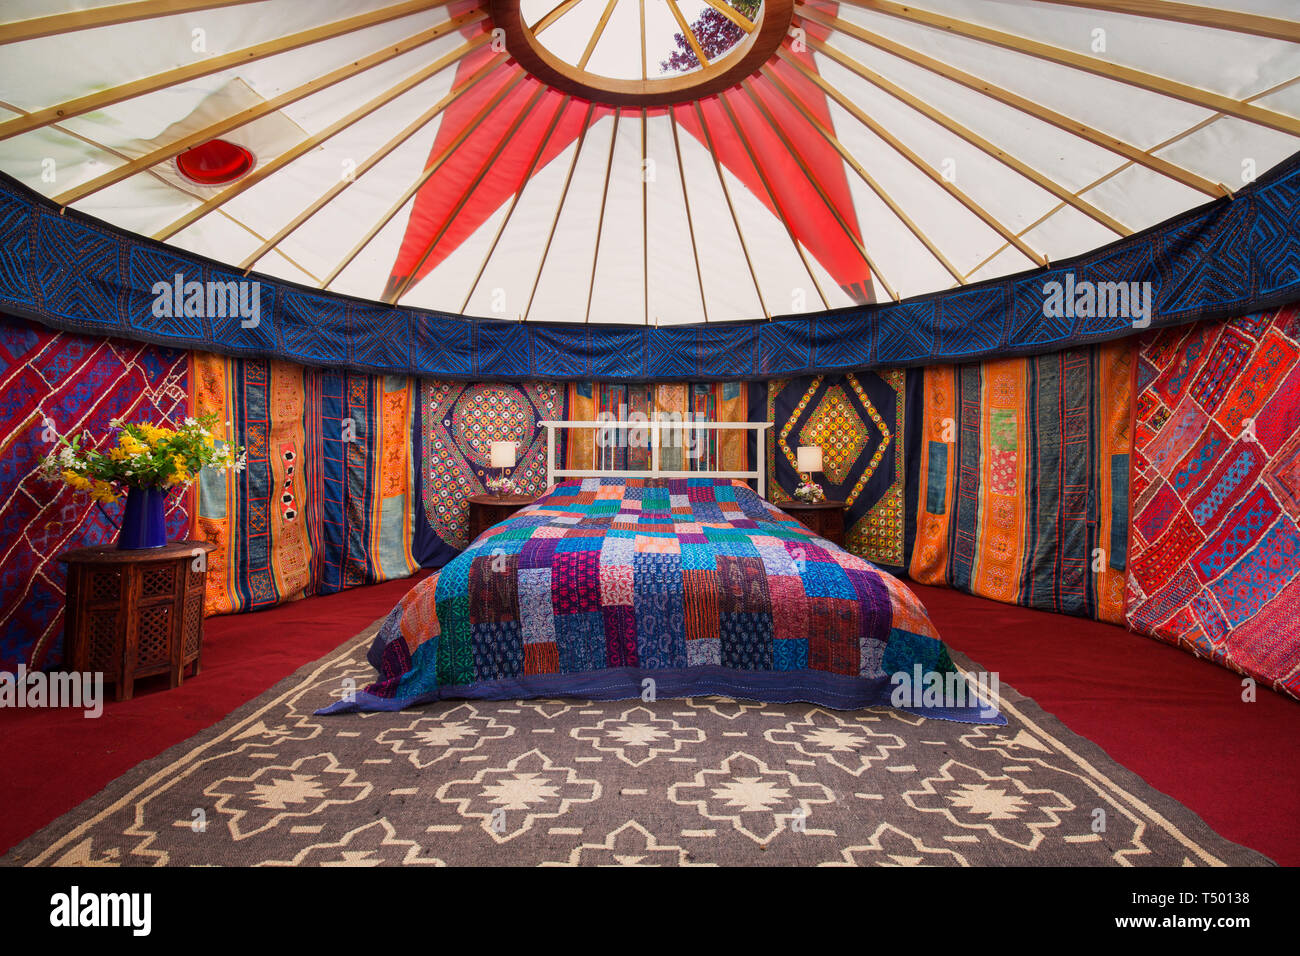 The Interior Of A Bright Colourful Moroccan Style Yurt Tent